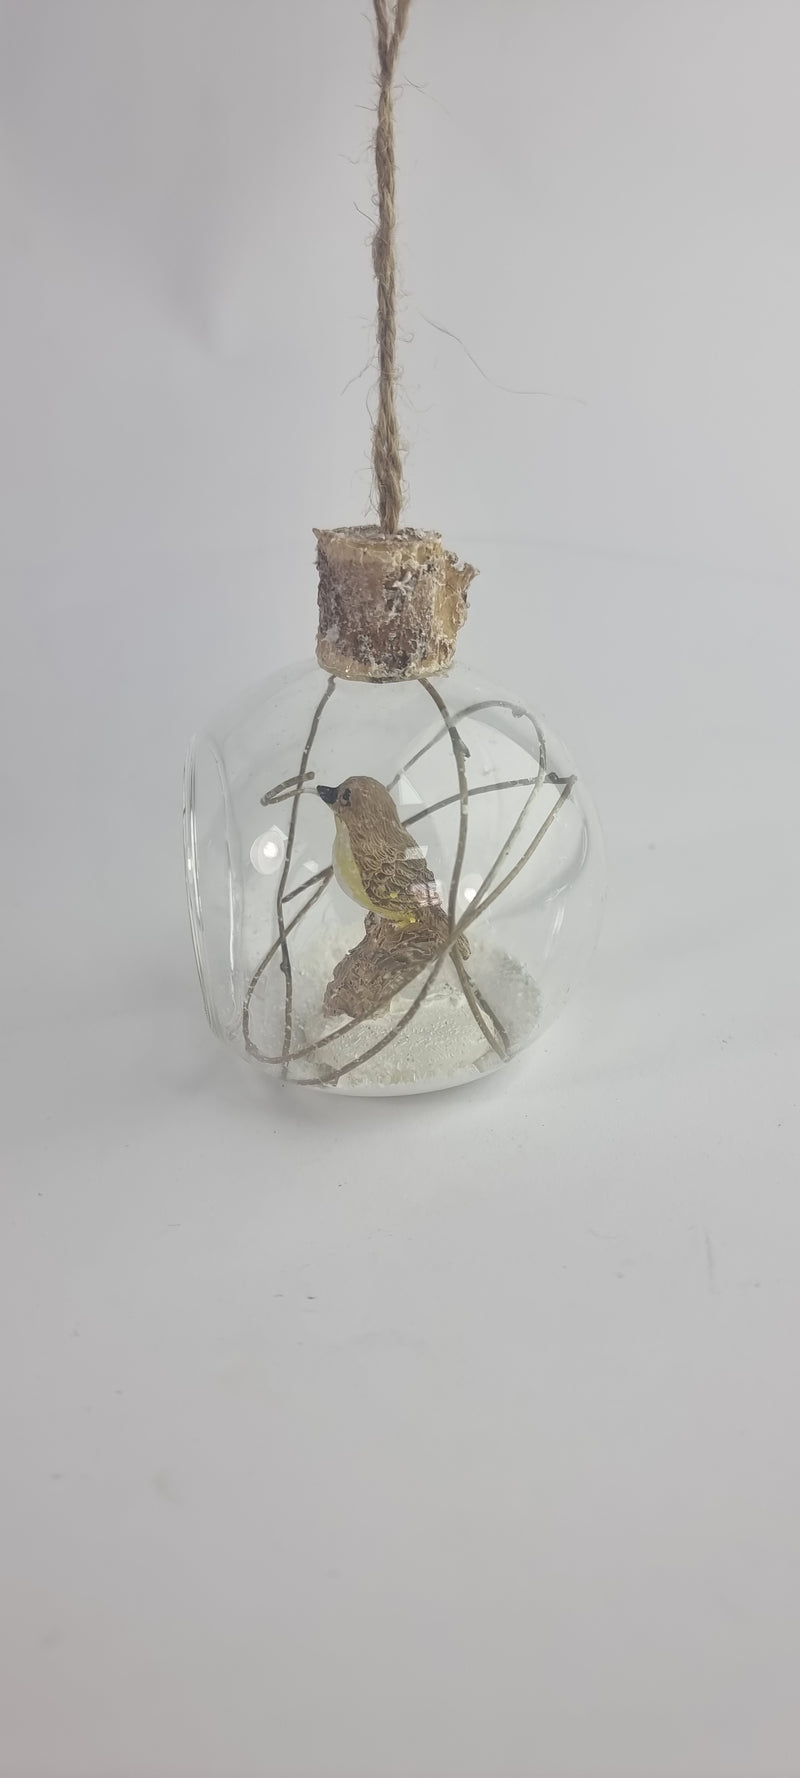 Glass Christmas Bauble with Bird Inside